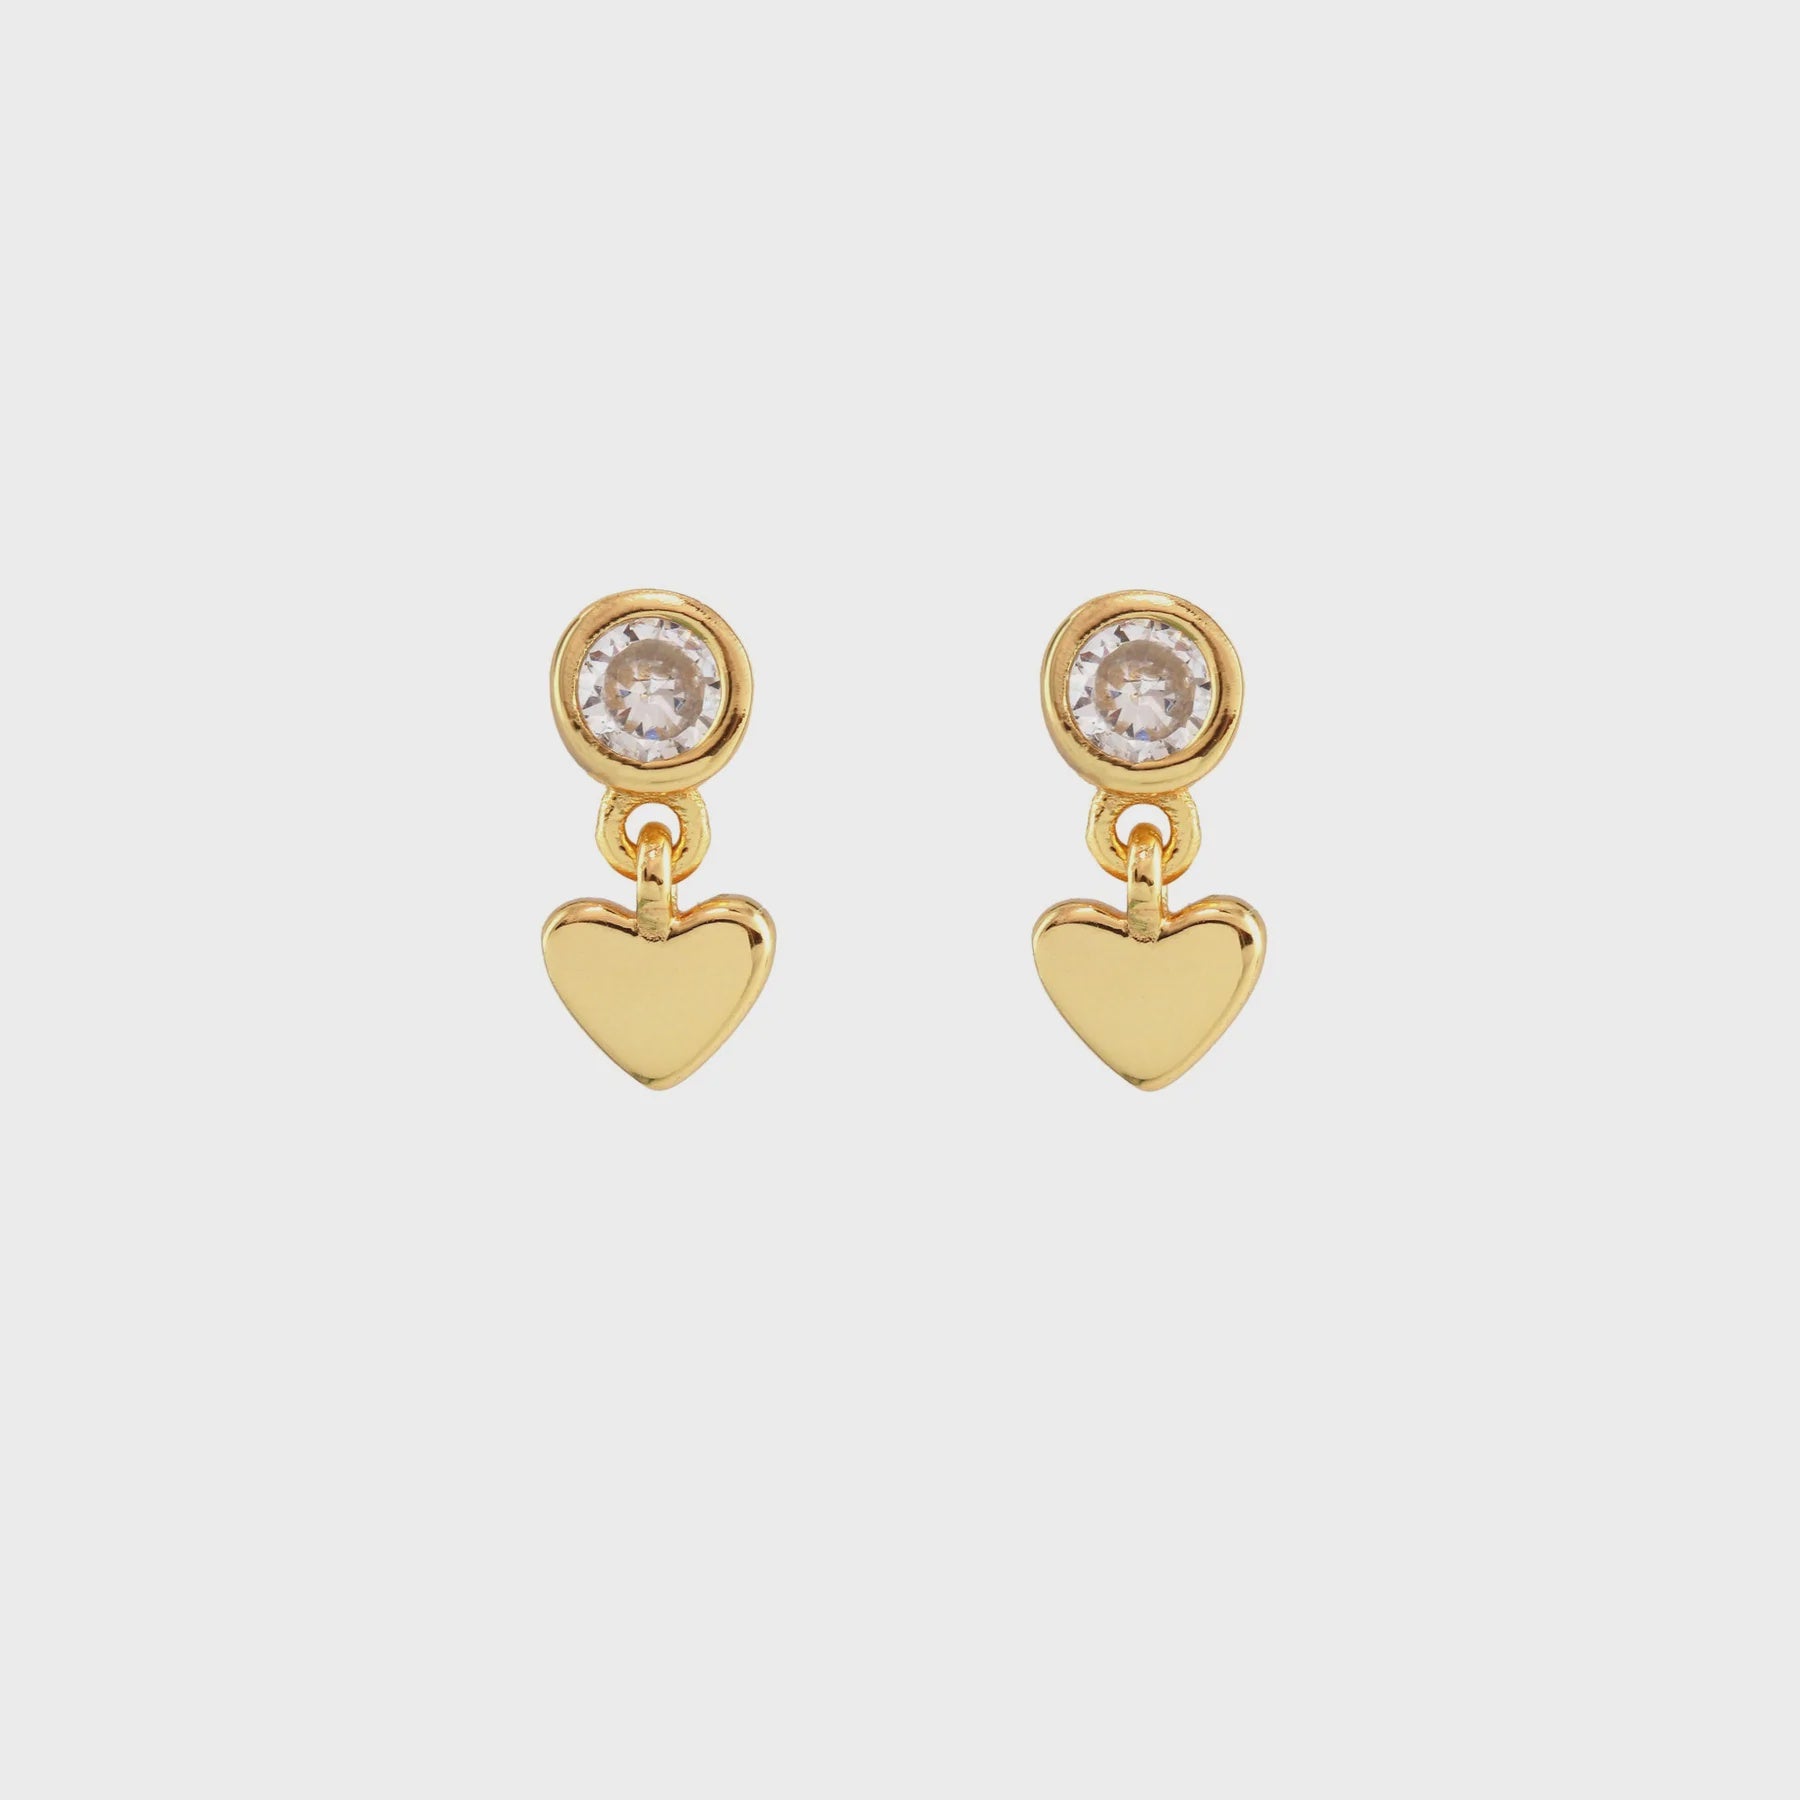 KRIS NATION - HEART AND CRYSTAL SWING STUD EARRINGS IN GOLD